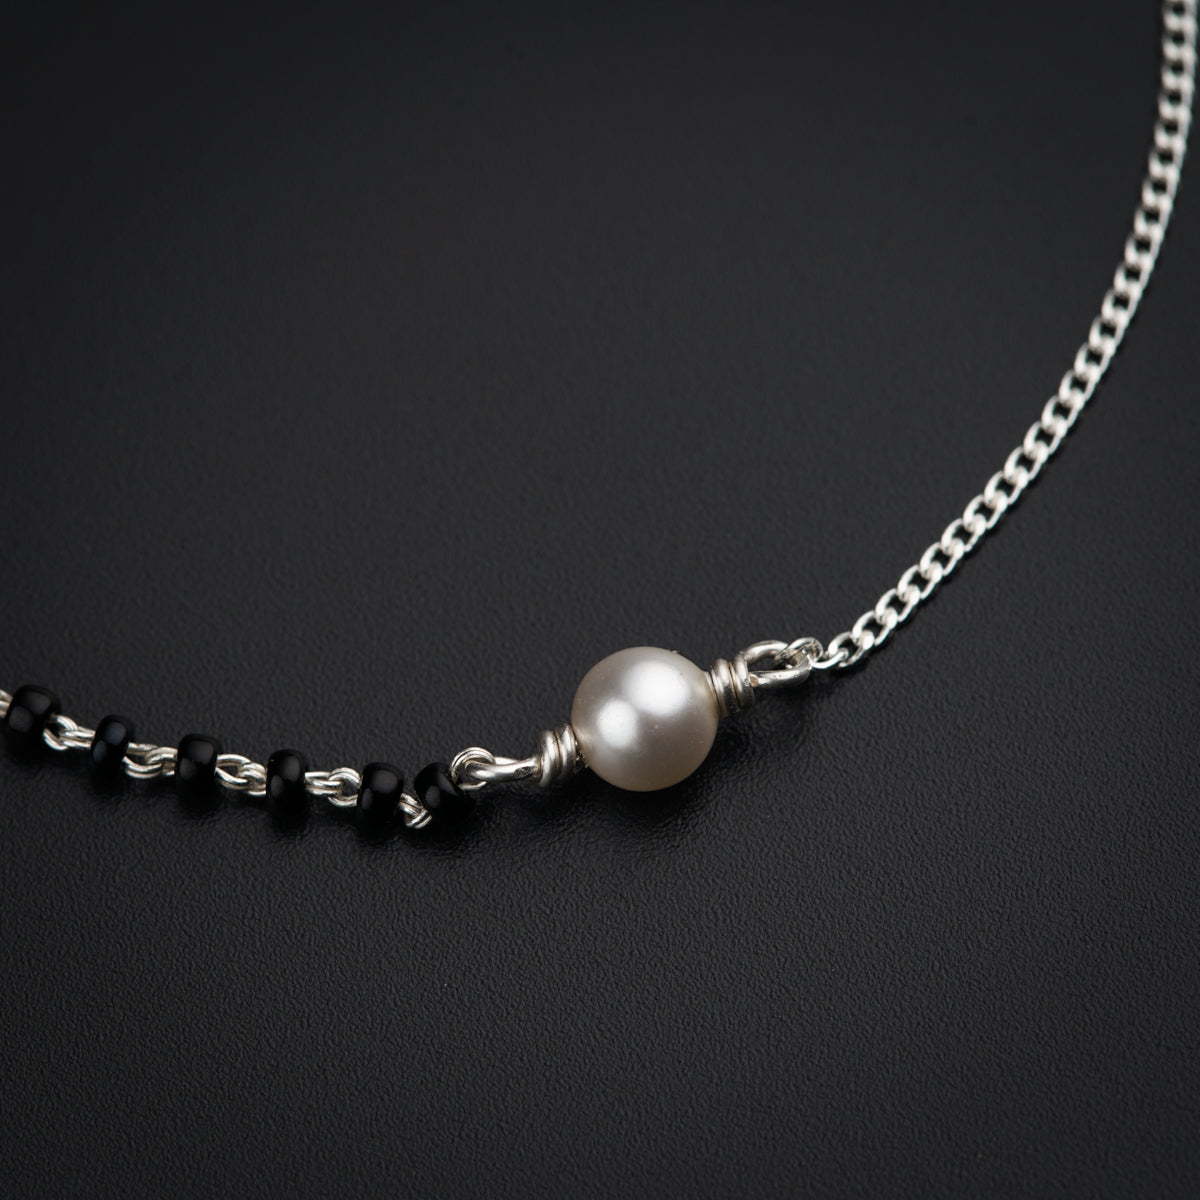 a necklace with a white pearl on a black background